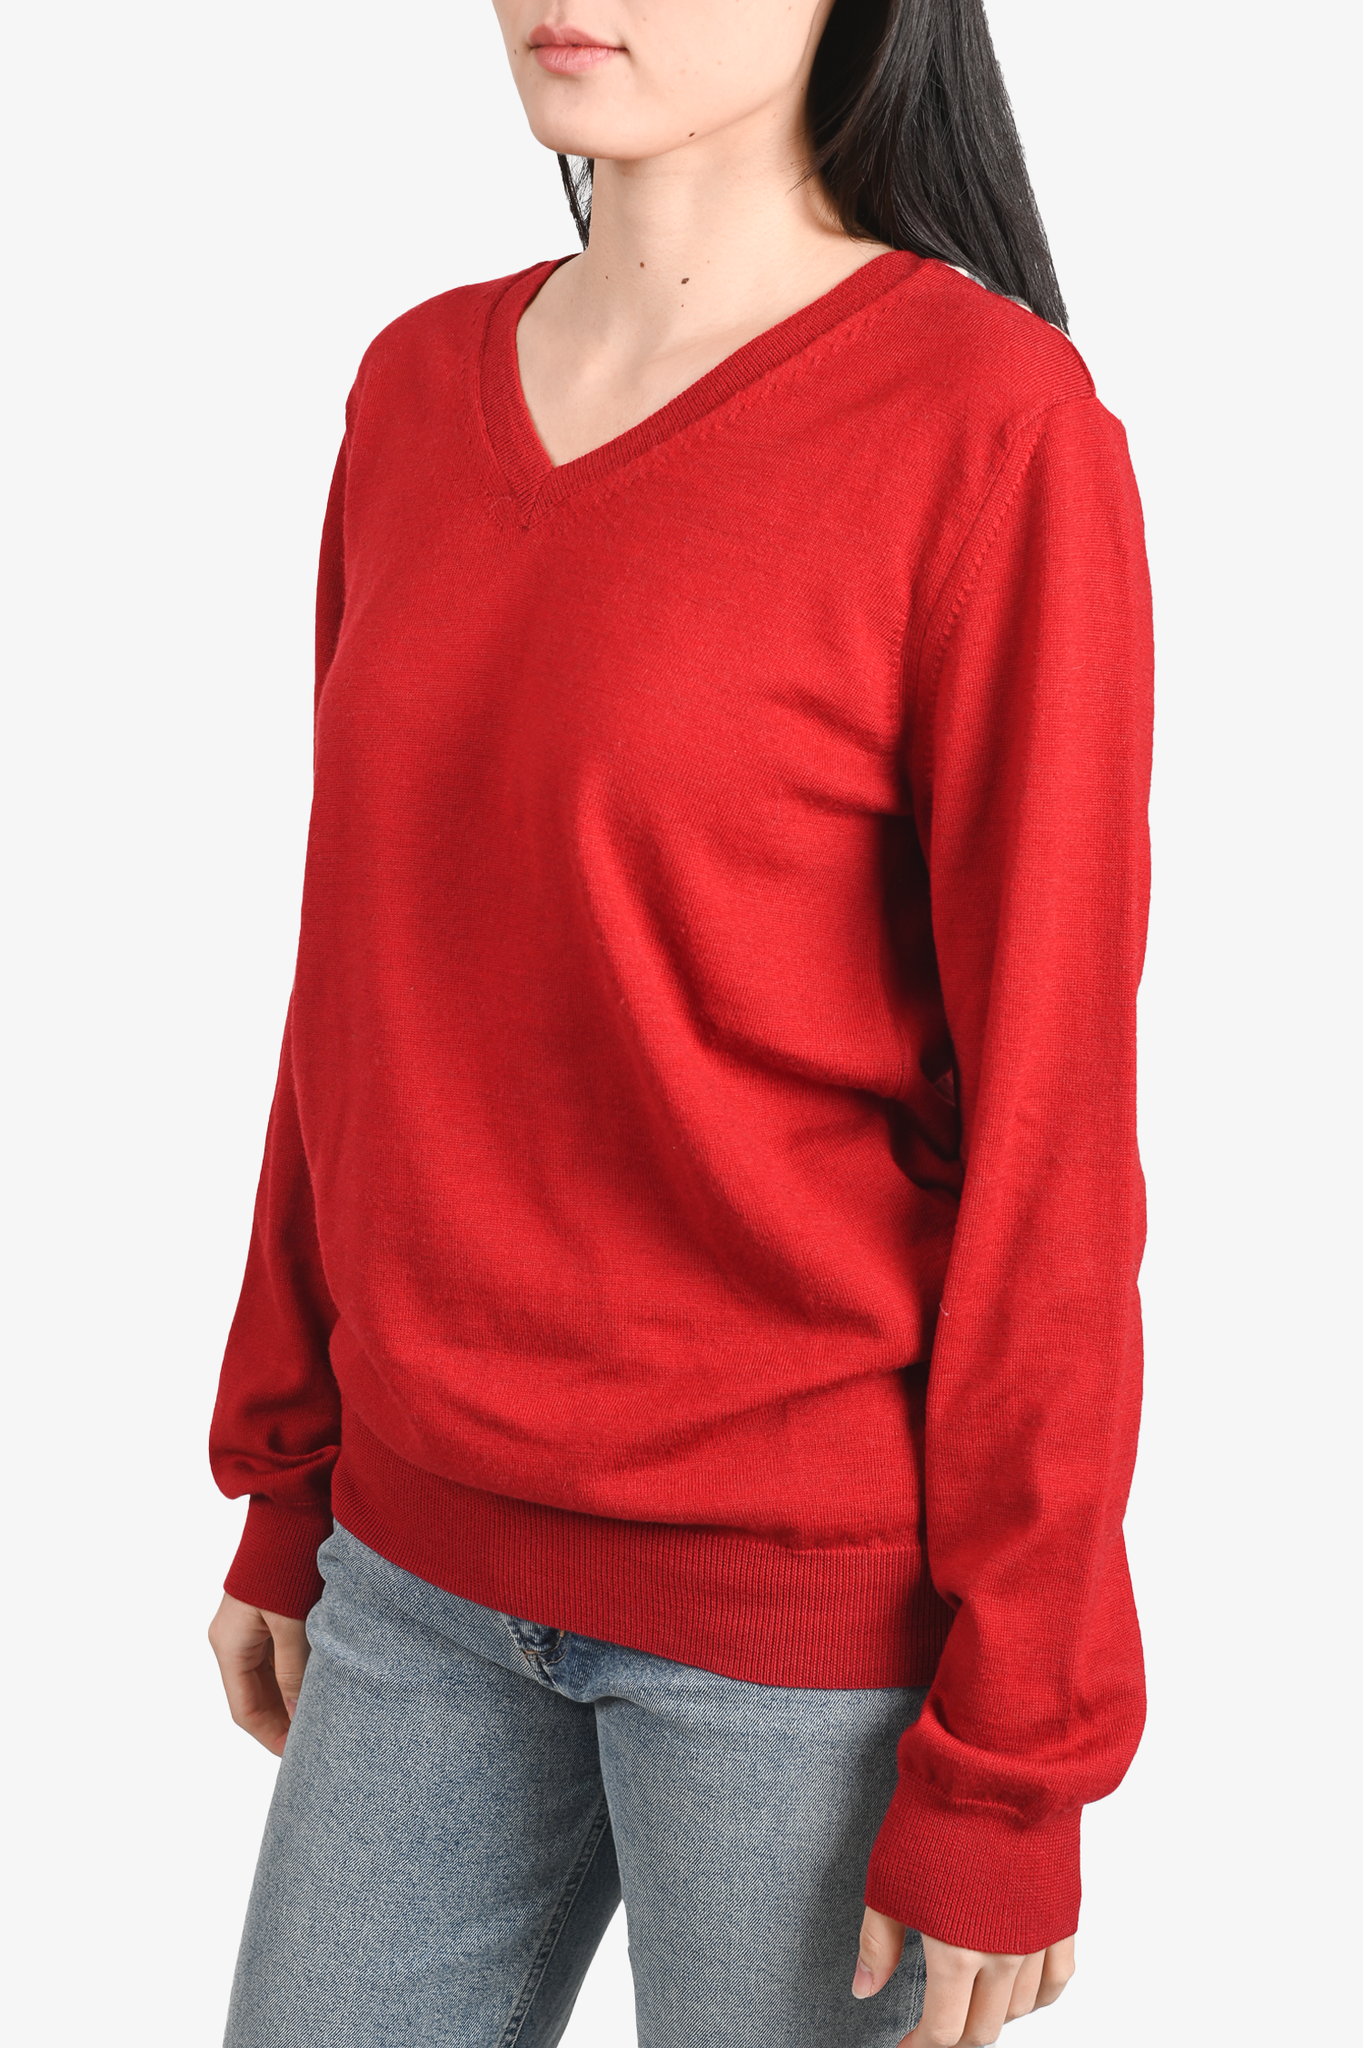 Burberry Brit Red Merino Wool V-Neck Sweater Size S